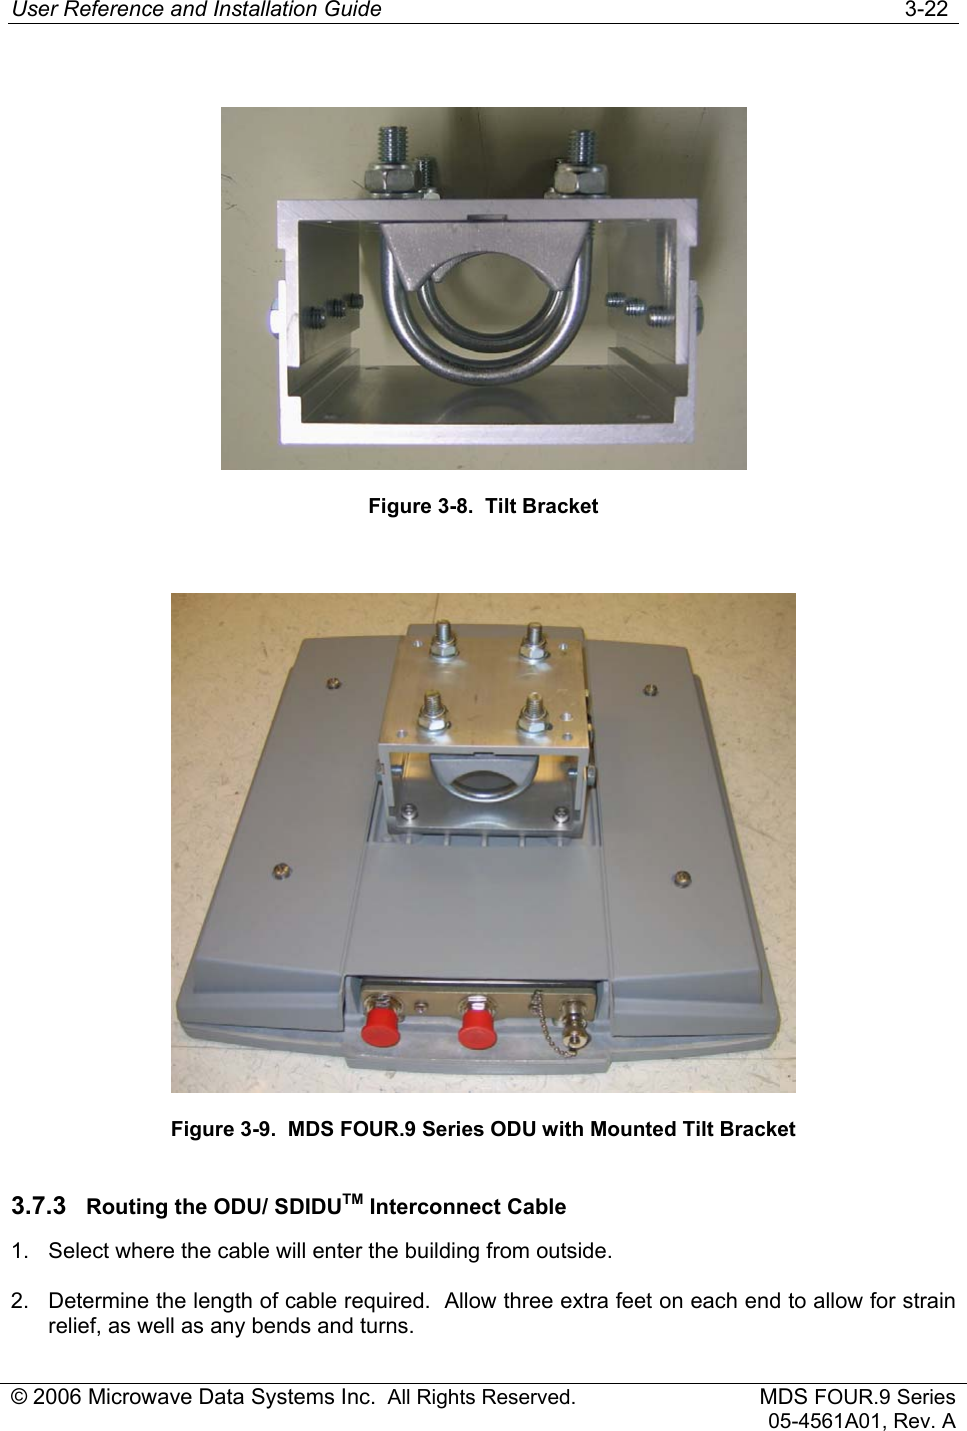 User Reference and Installation Guide   3-22 © 2006 Microwave Data Systems Inc.  All Rights Reserved. MDS FOUR.9 Series 05-4561A01, Rev. A   Figure 3-8.  Tilt Bracket   Figure 3-9.  MDS FOUR.9 Series ODU with Mounted Tilt Bracket 3.7.3  Routing the ODU/ SDIDUTM Interconnect Cable 1.  Select where the cable will enter the building from outside. 2.  Determine the length of cable required.  Allow three extra feet on each end to allow for strain relief, as well as any bends and turns. 